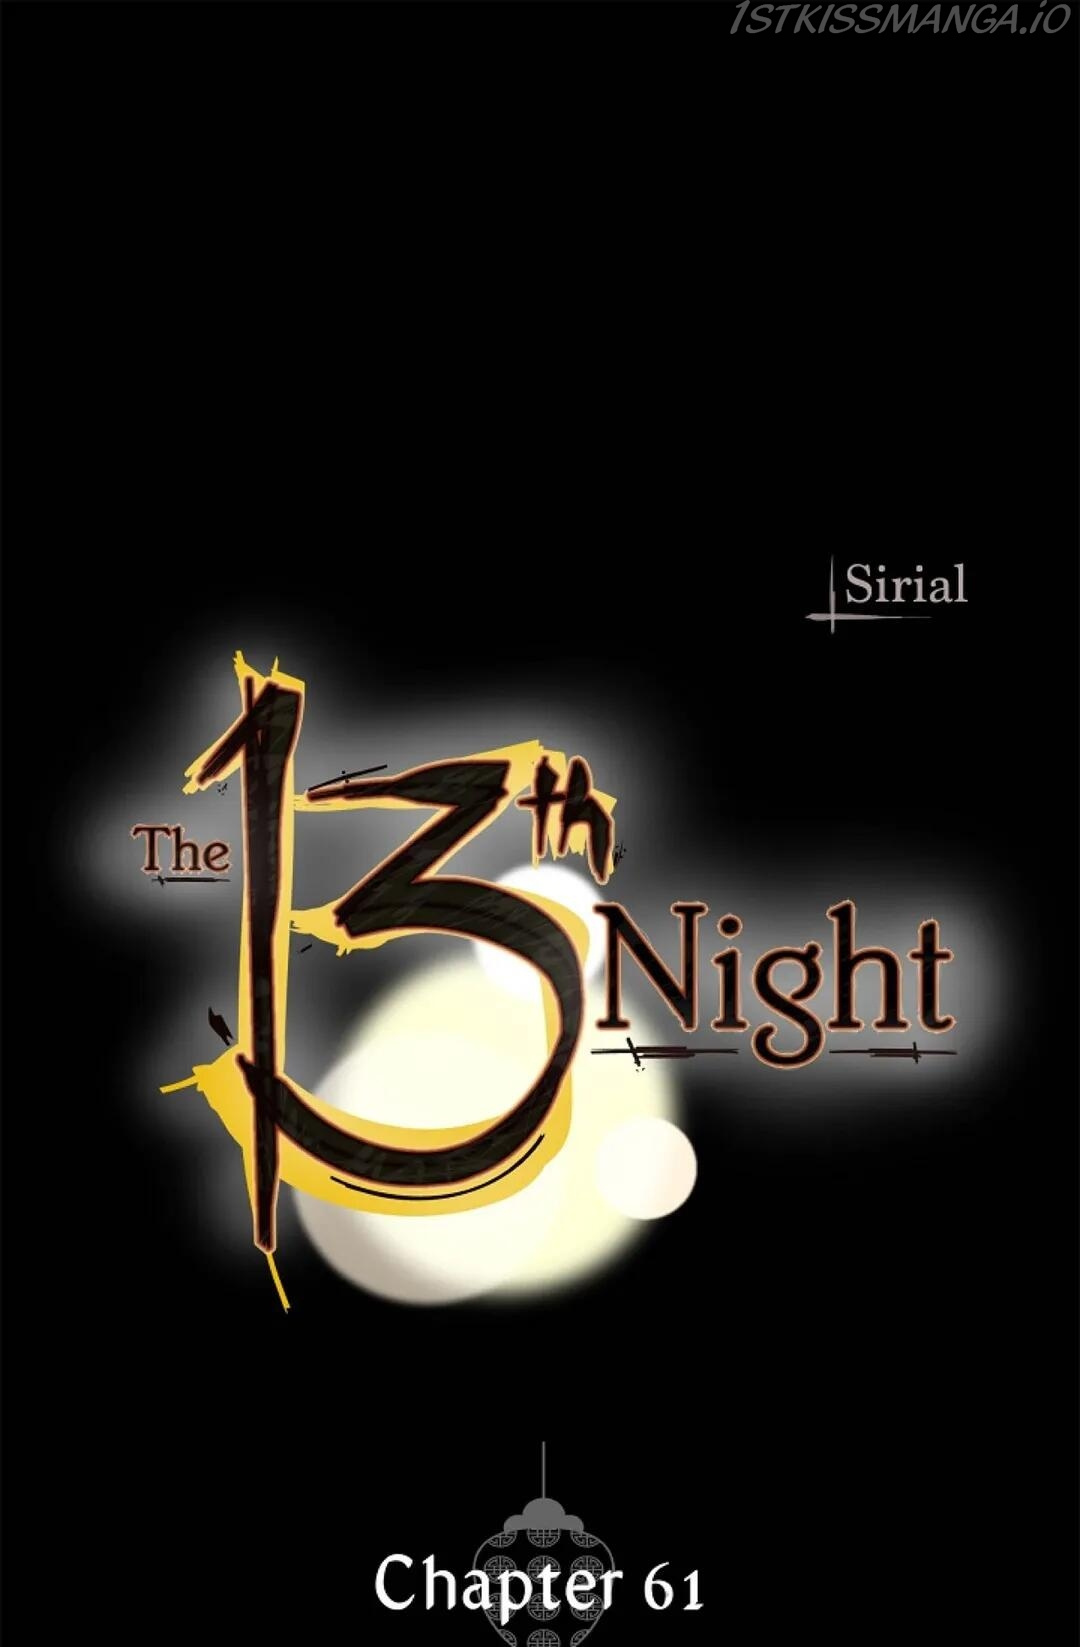 The 13Th Night Chapter 61